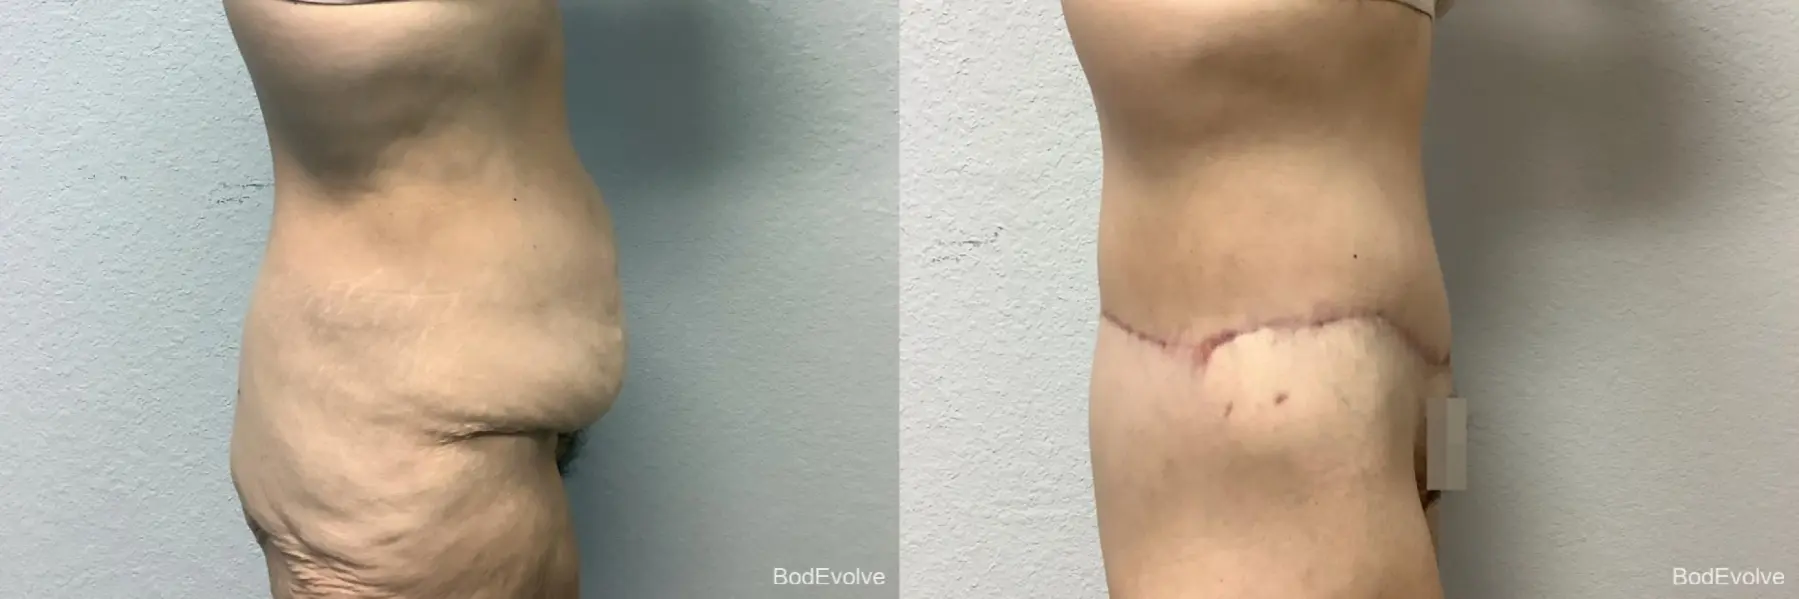 Body Lift: Patient 5 - Before and After 6